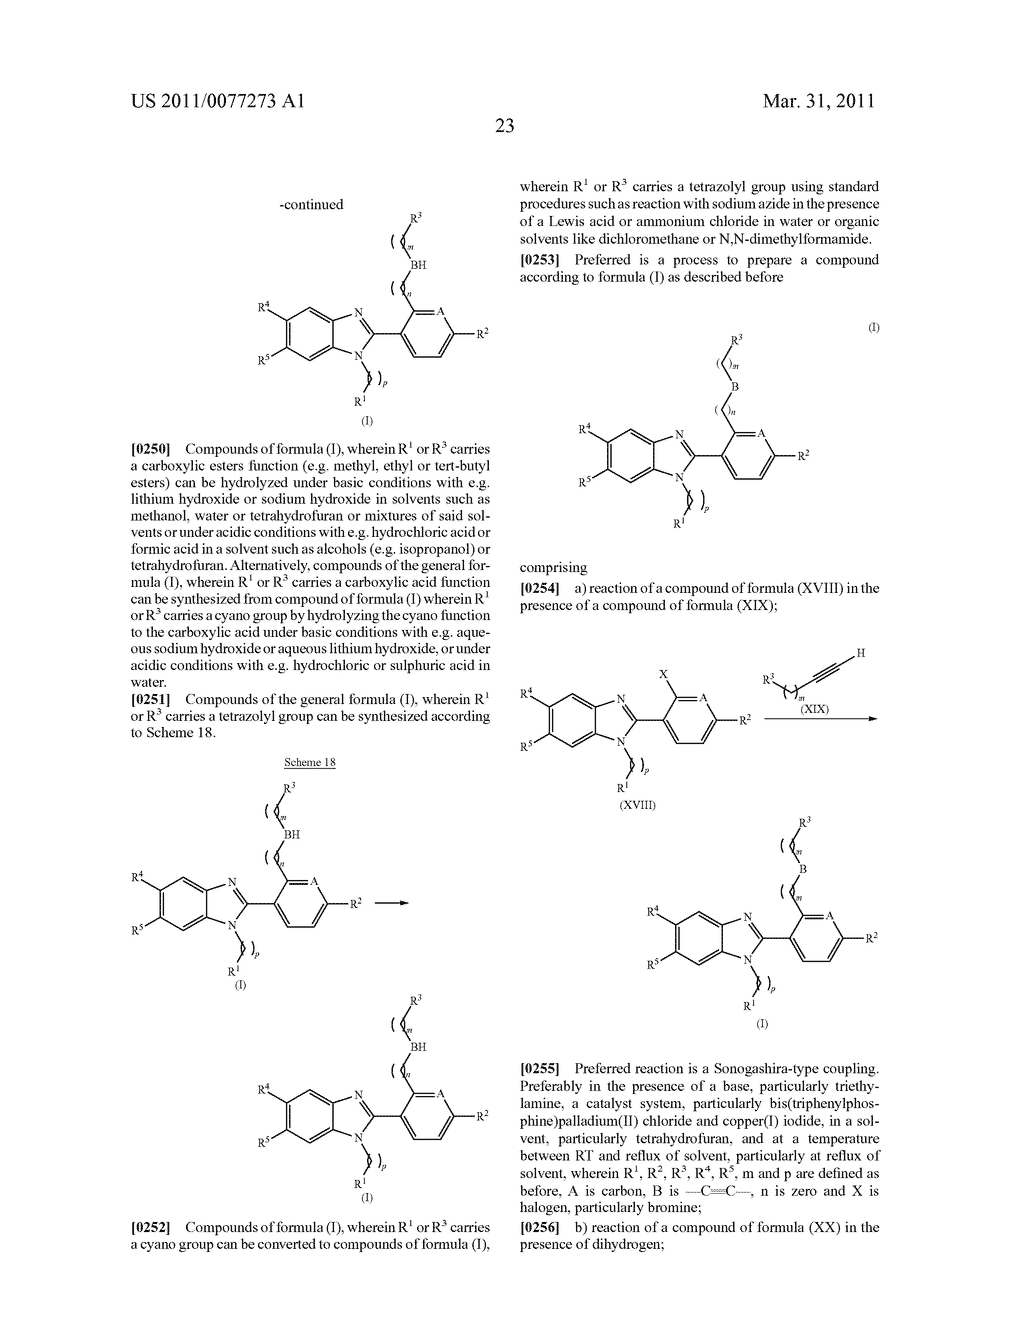 NEW BENZIMIDAZOLE DERIVATIVES - diagram, schematic, and image 24